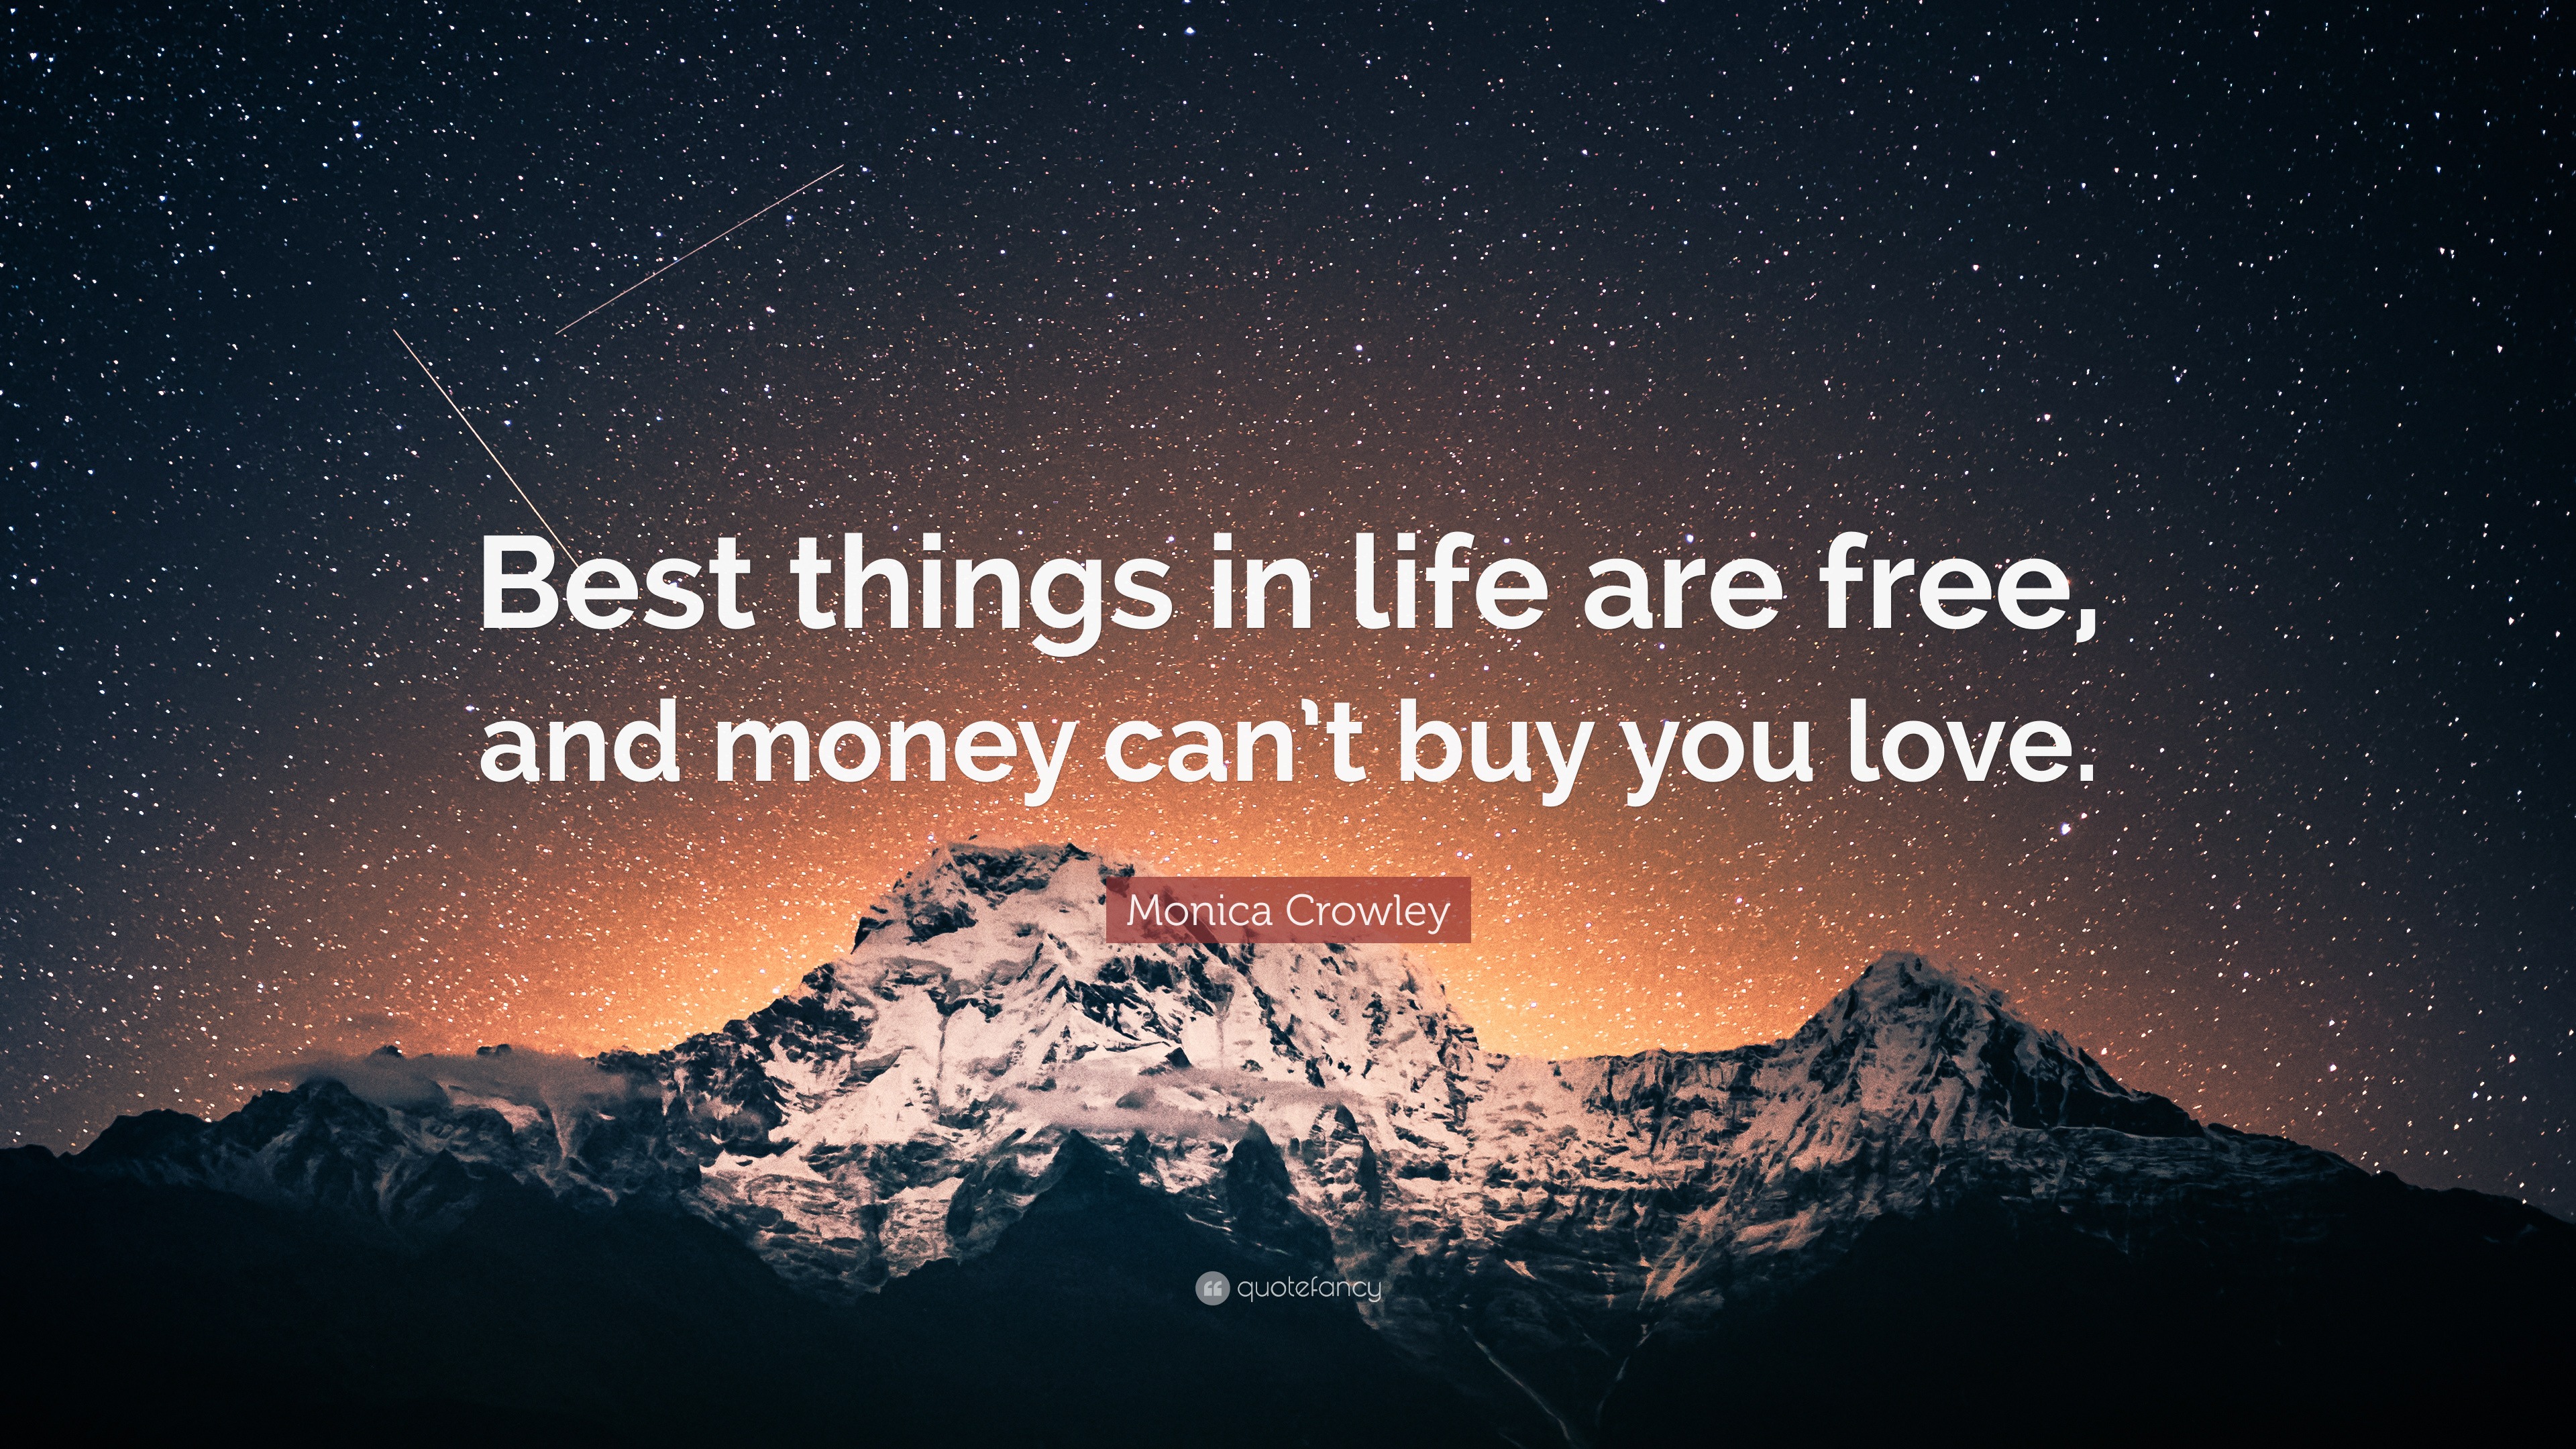 Monica Crowley Quote “Best things in life are free and money can